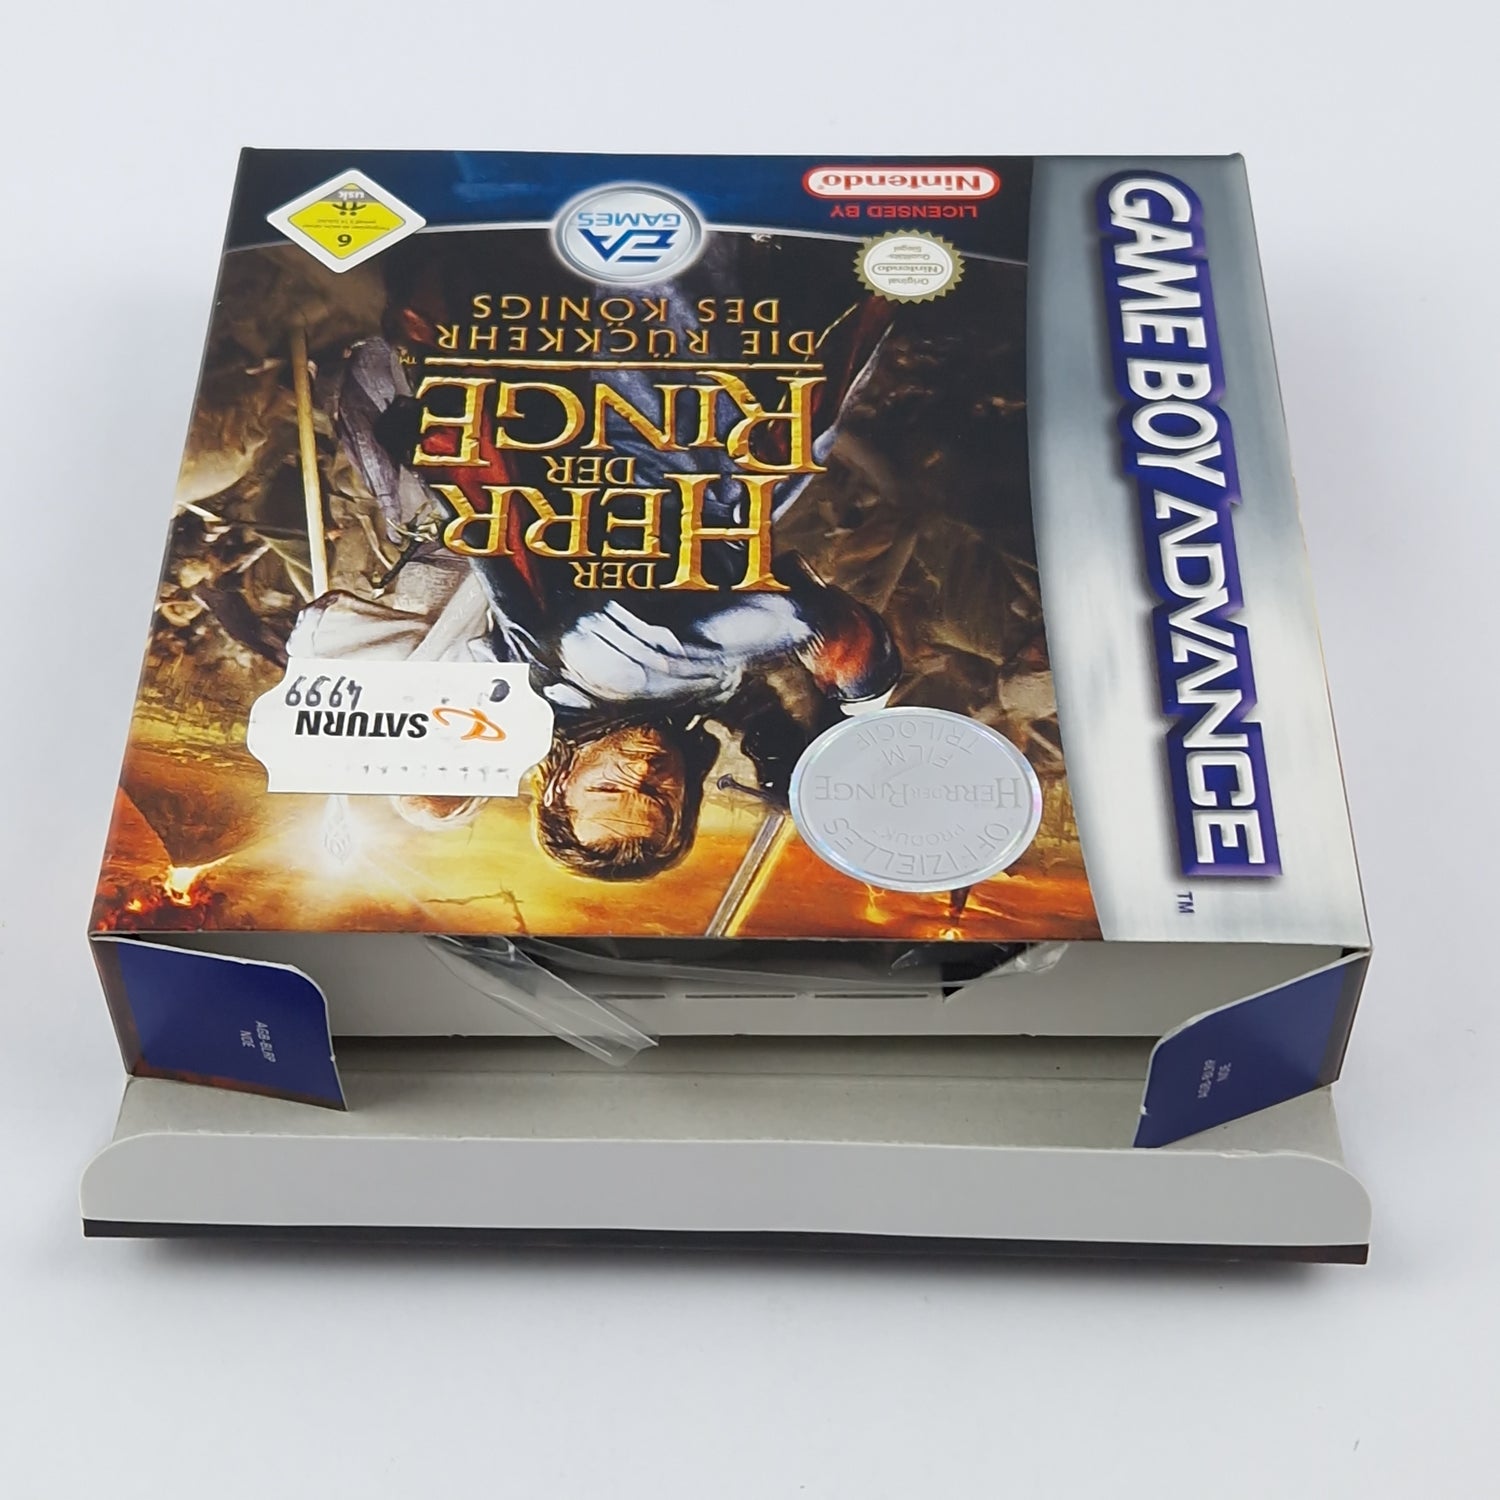 Nintendo Game Boy Advance Game: The Lord of the Rings The Return of the King orig